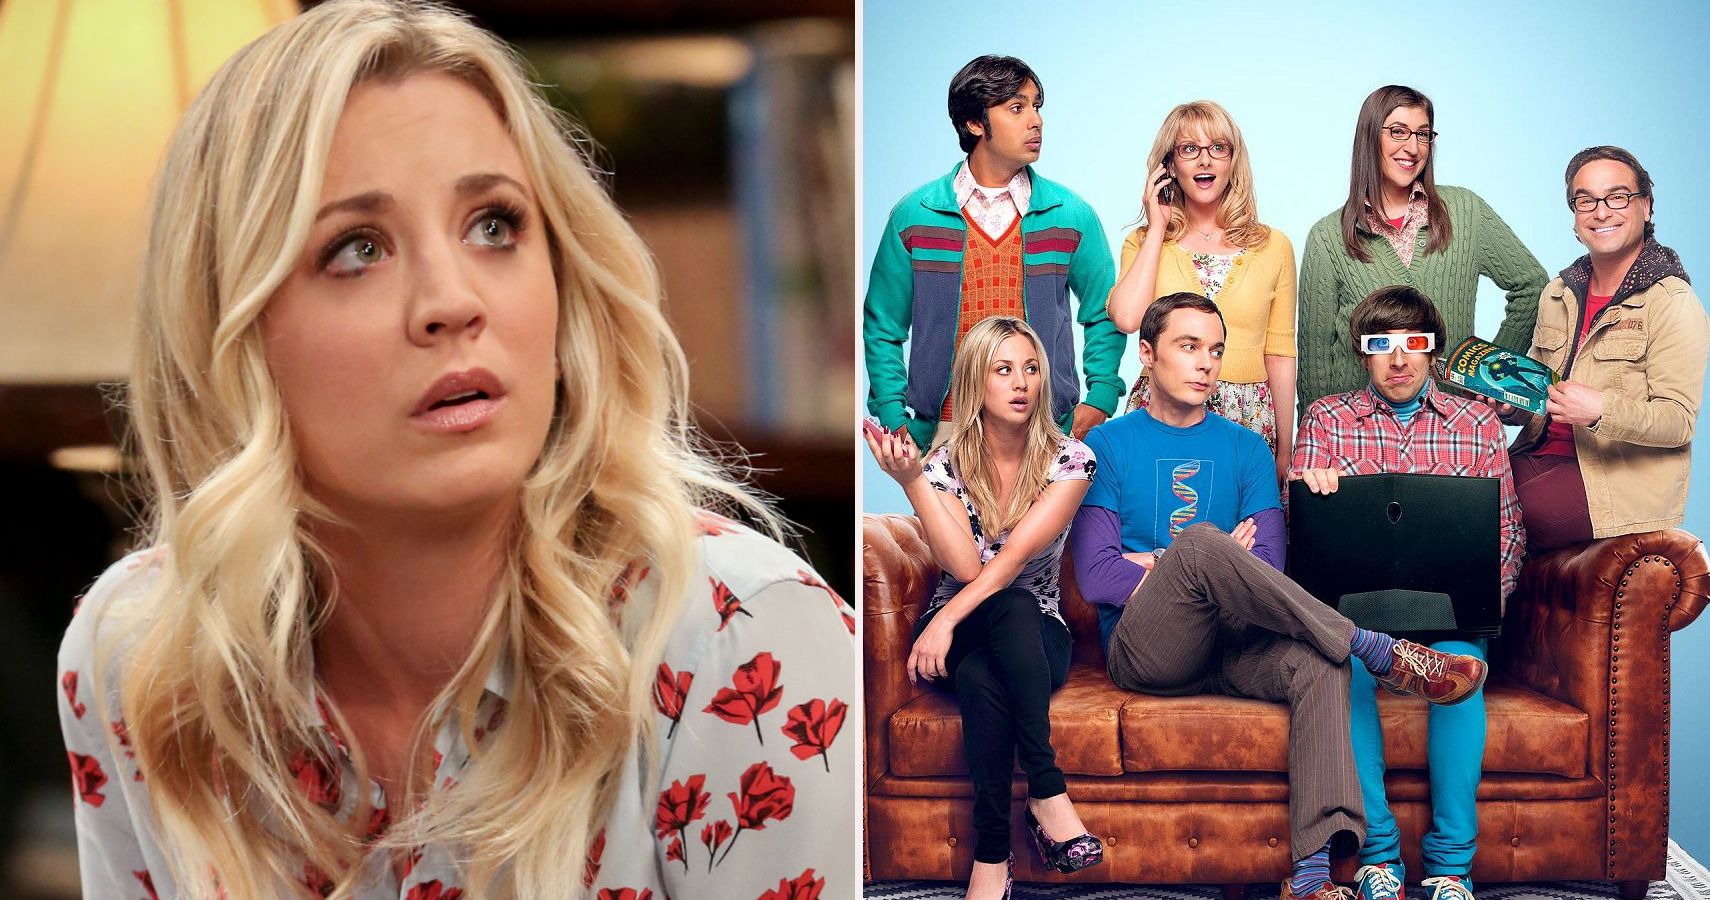 The Big Bang Theory 10 Worst Episodes Of The Show (According To IMDb)